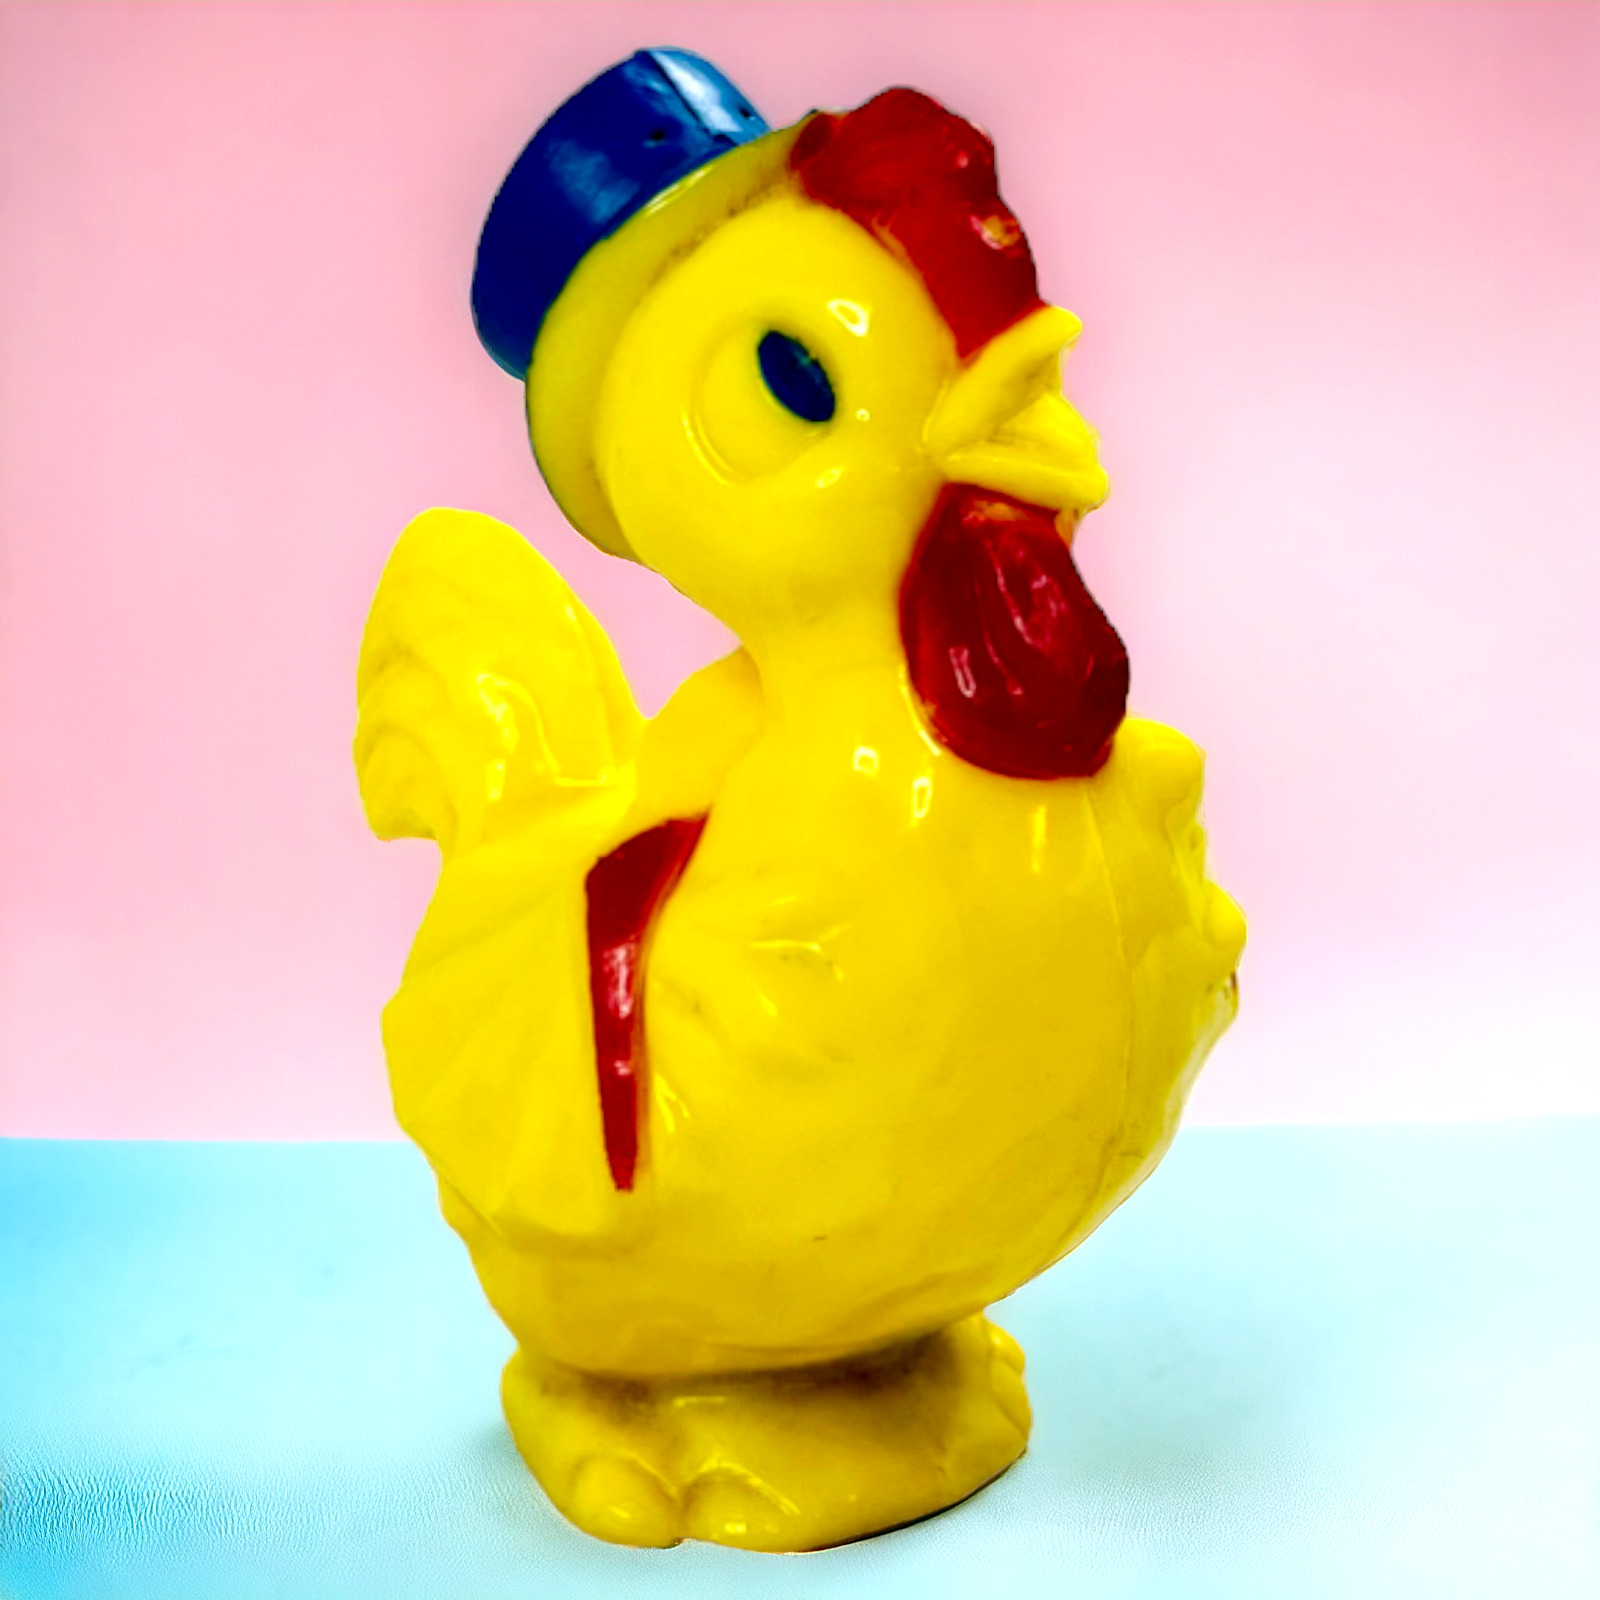 Vintage Plastic Chicken Rooster Hard Rattle Irwin Rosbro Easter Chick Toy Figure